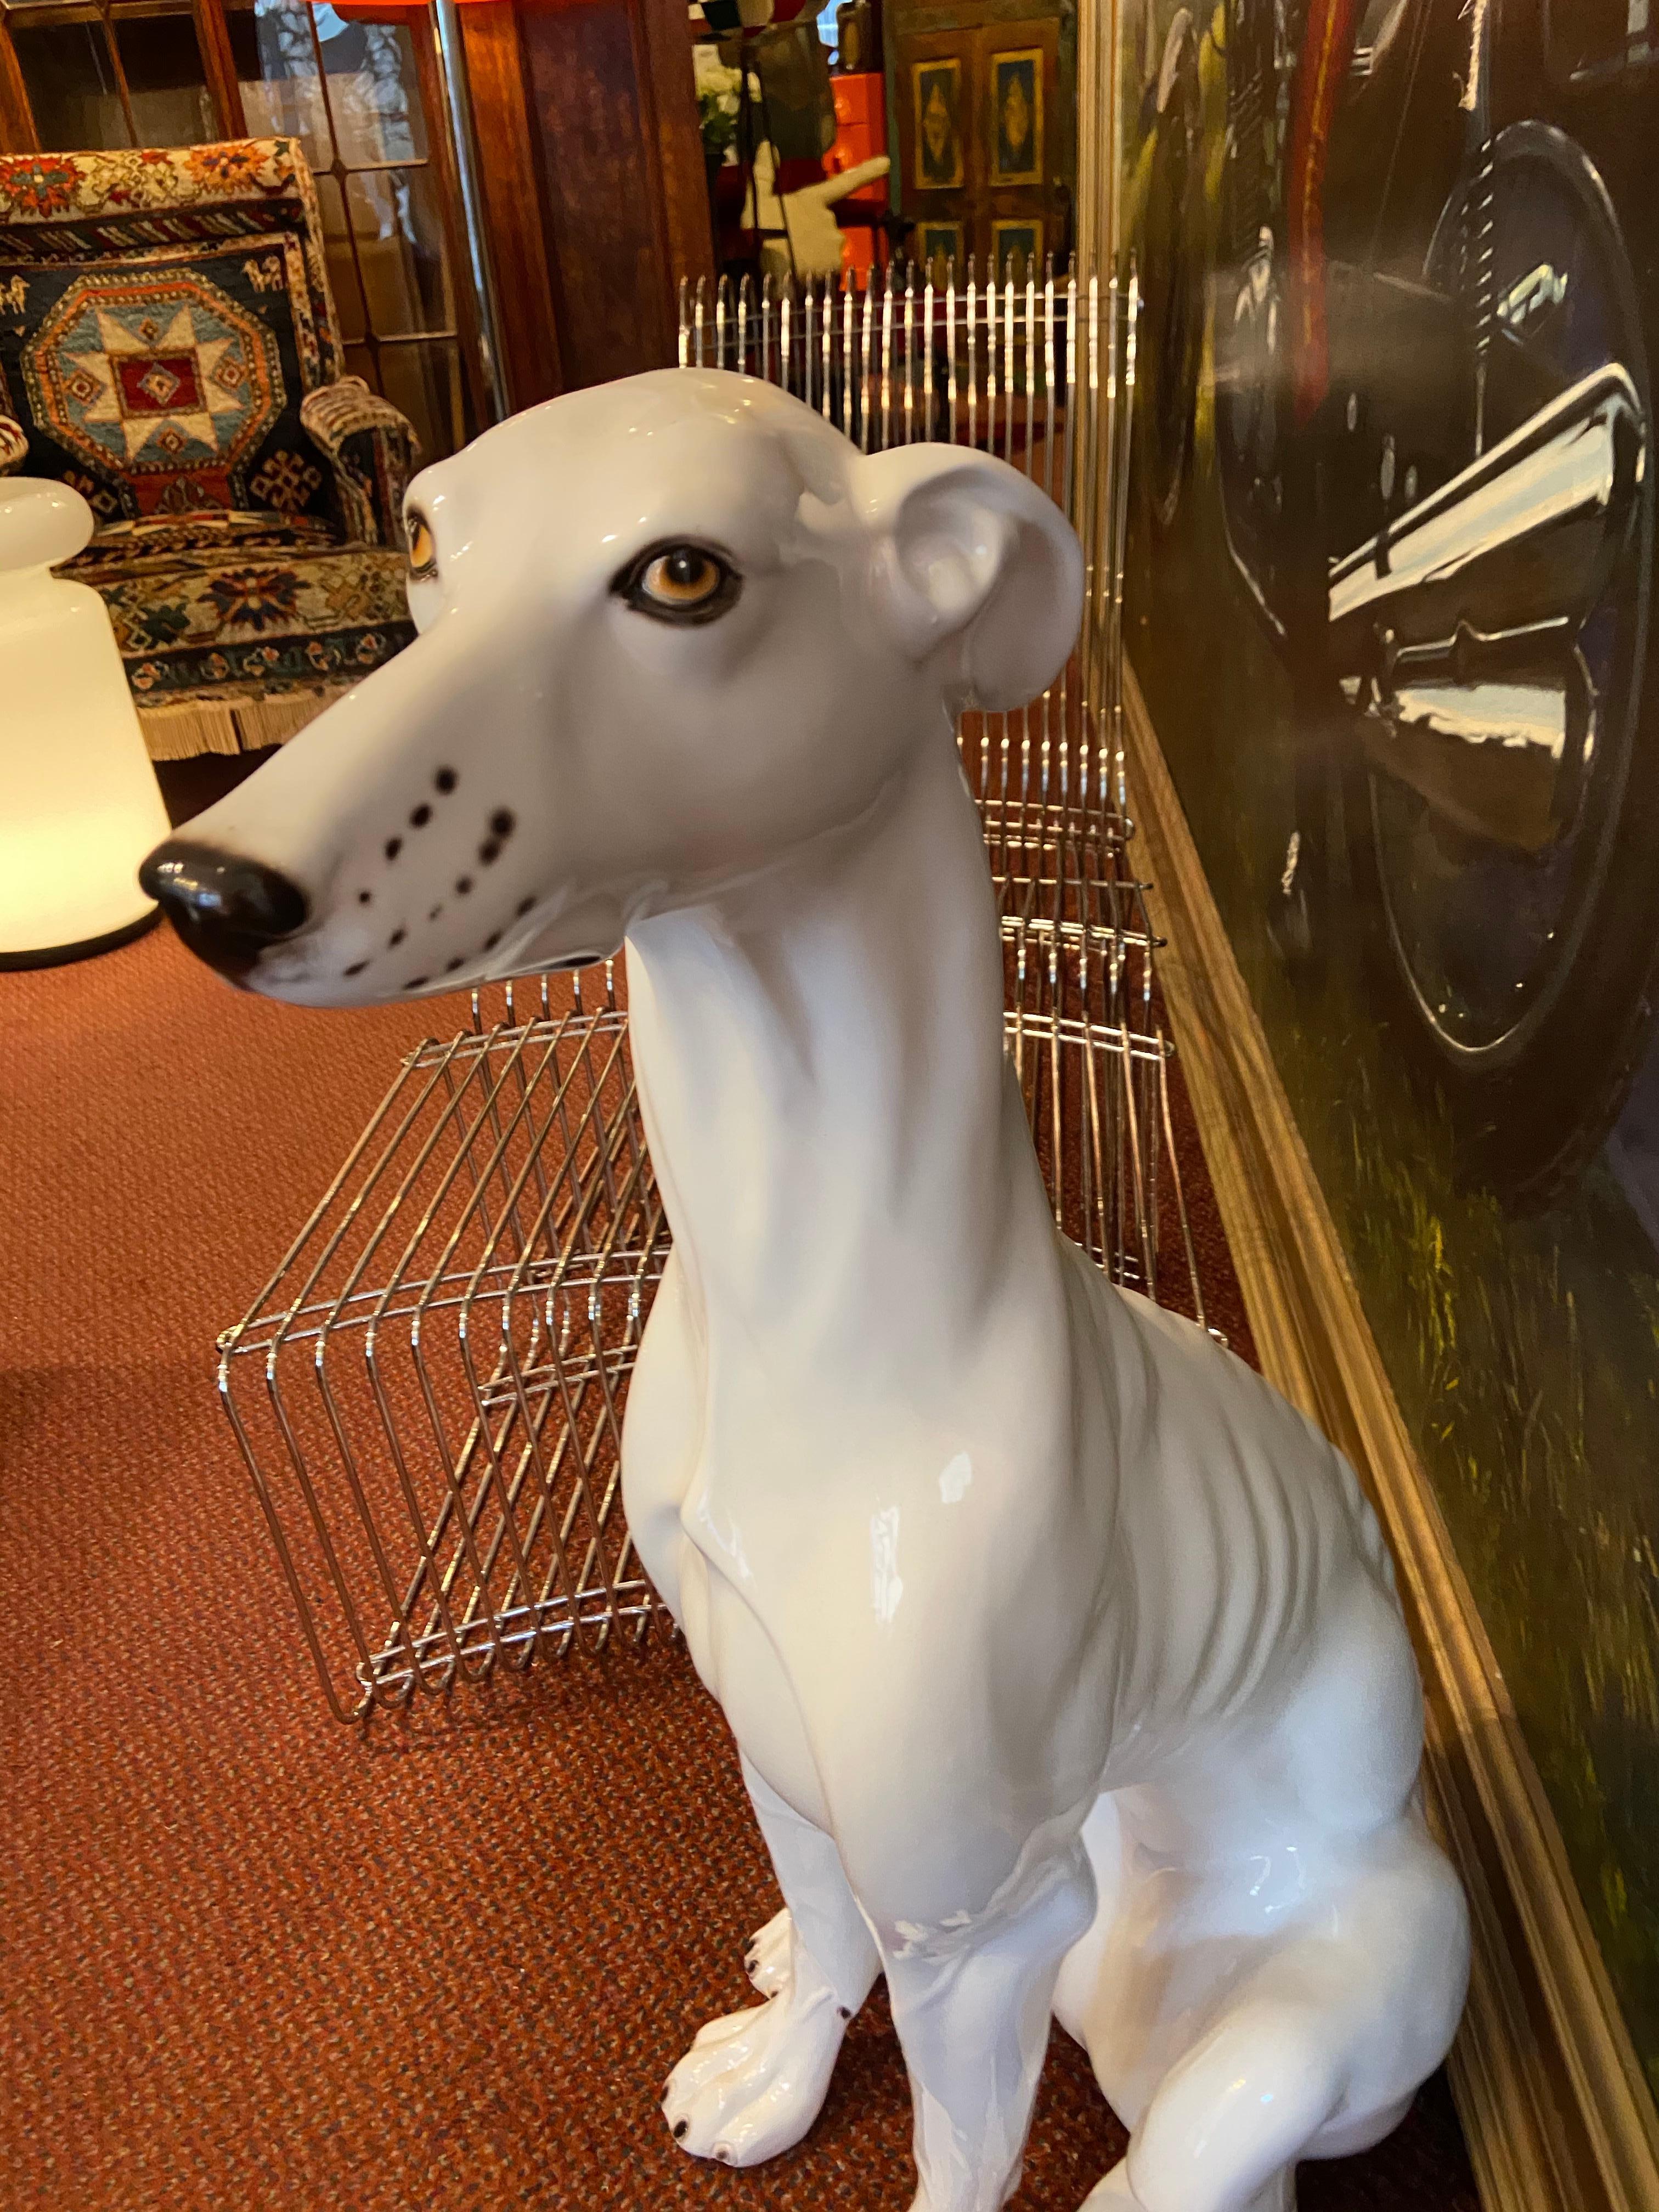 A wonderful, charming Italian Hollywood Regency life-size ceramic greyhound.

Beautiful statement piece for your home.

This stunning greyhound is free from cracks, chips or repairs and is in excellent condition.